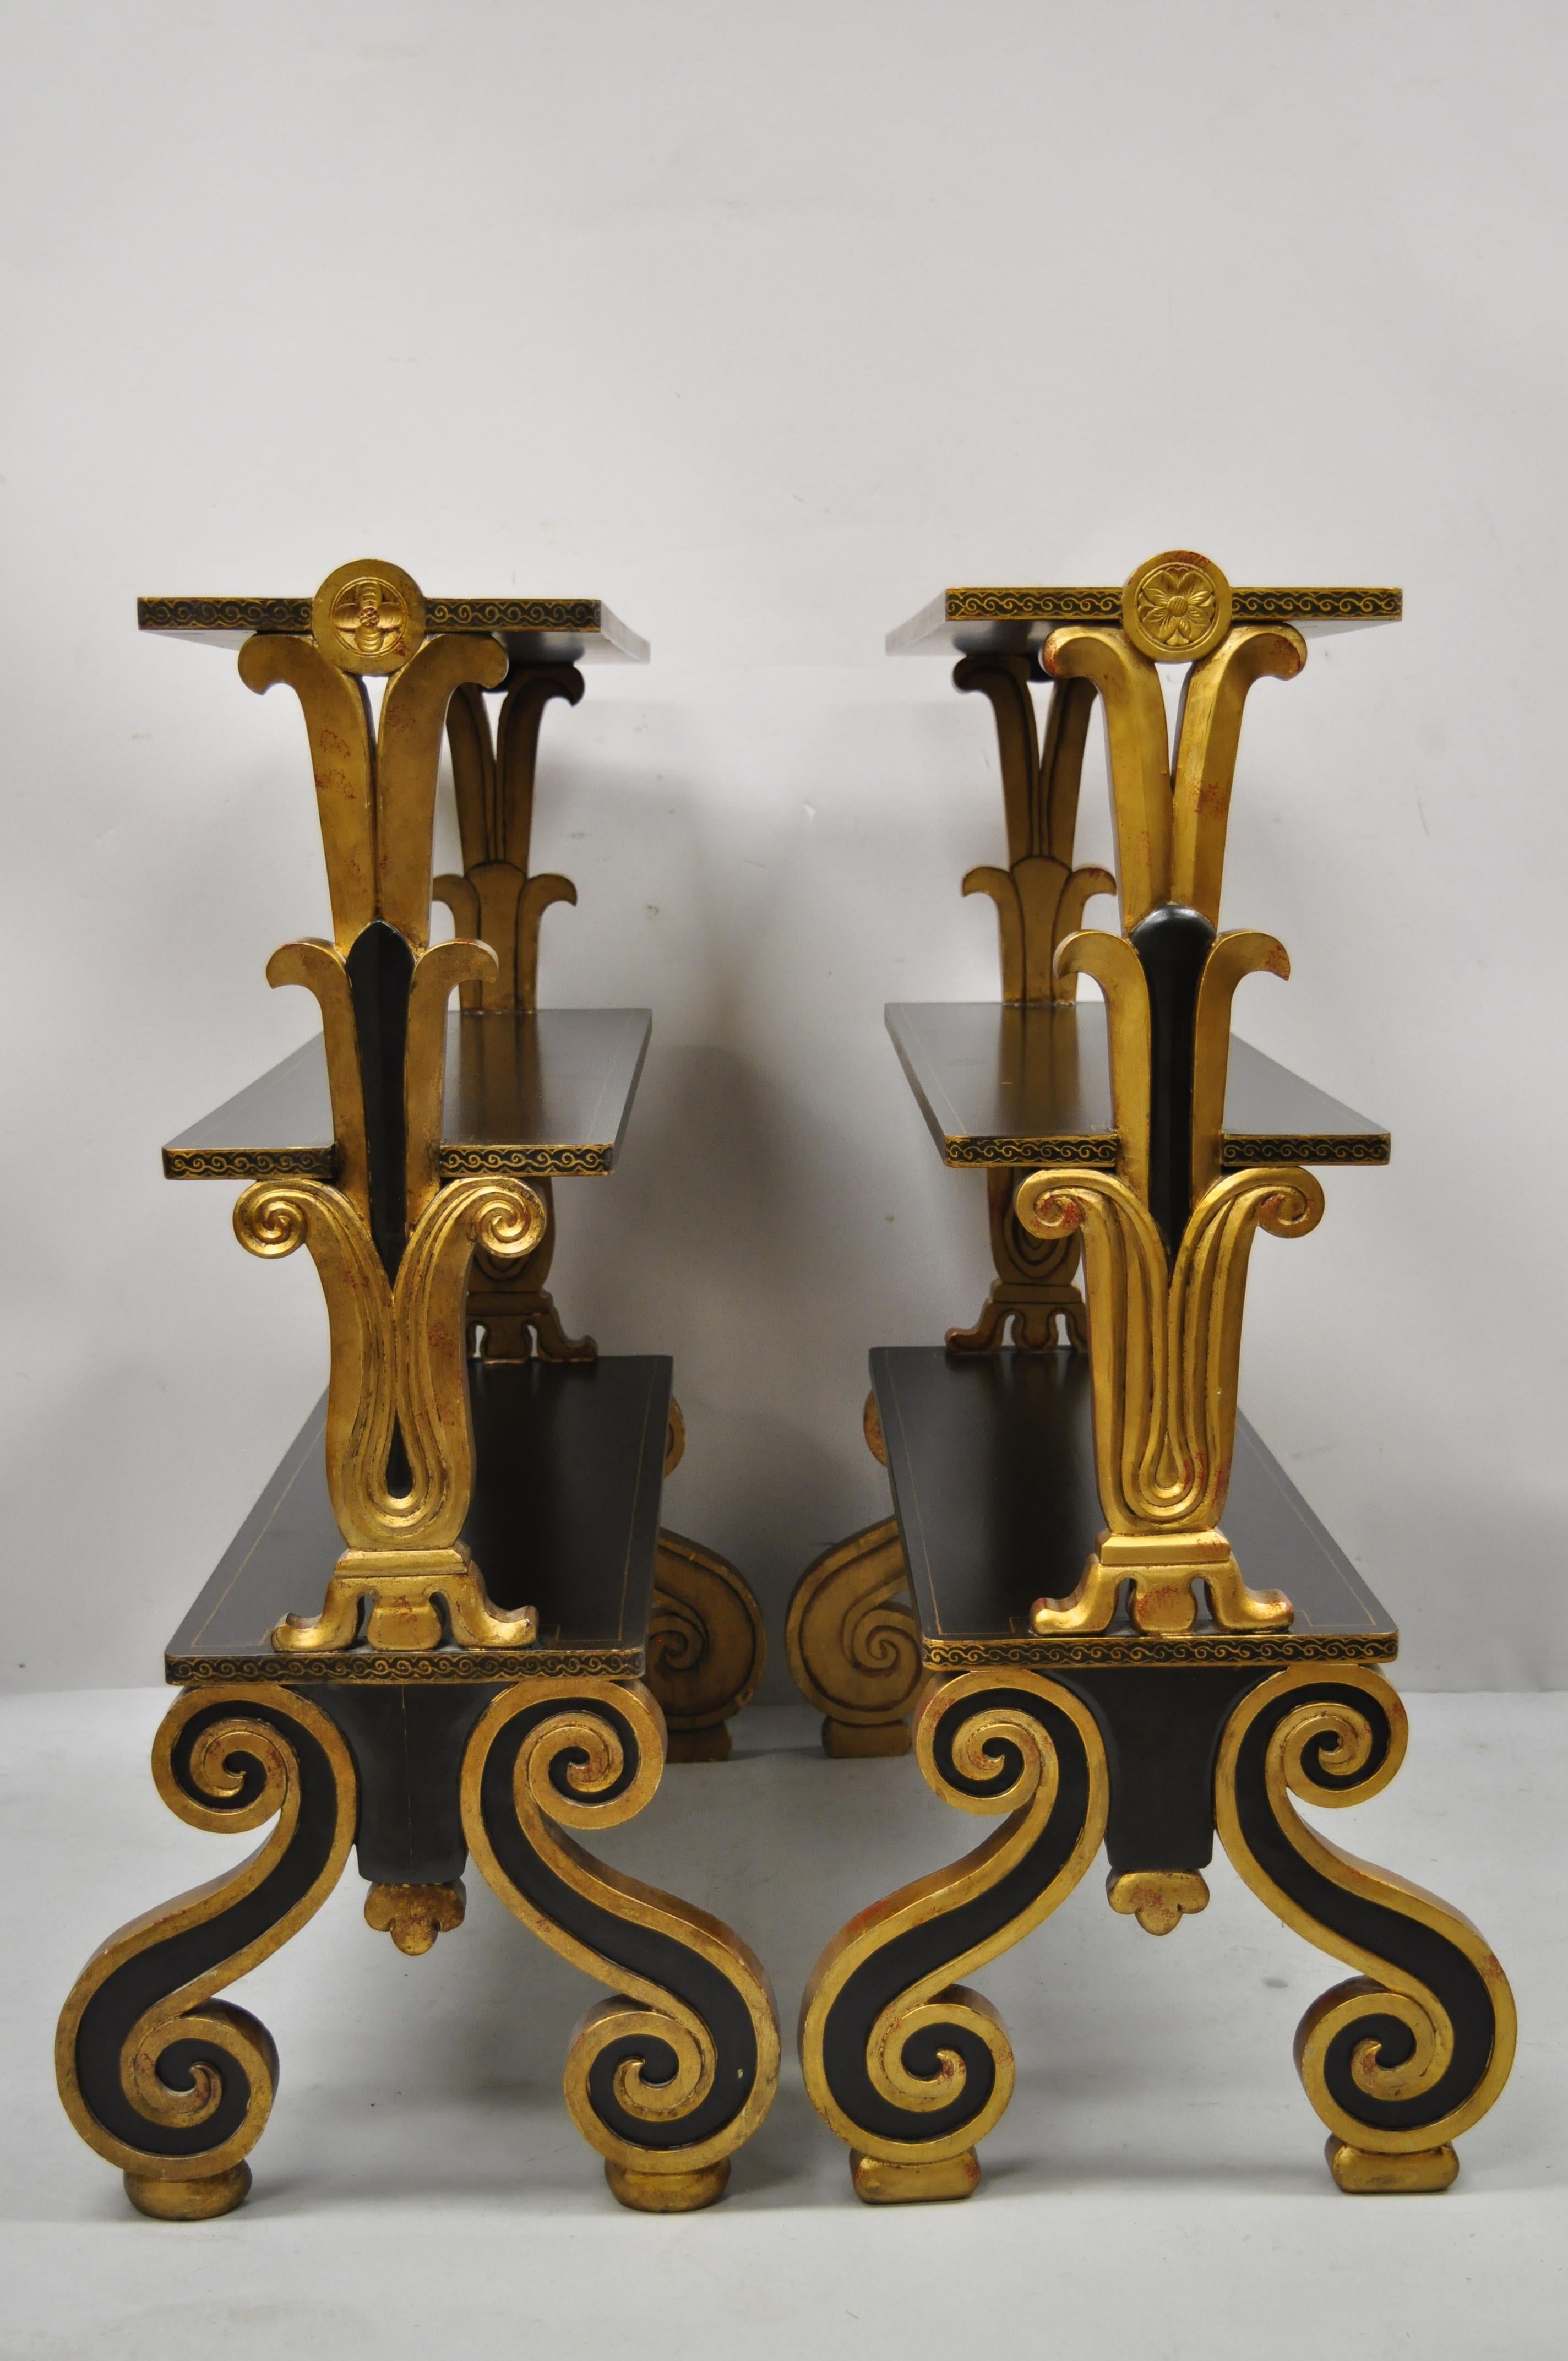 Regency Style Black & Gold 3 Tier Whatnot Stands Bookcase Shelves Curio, a Pair In Good Condition For Sale In Philadelphia, PA